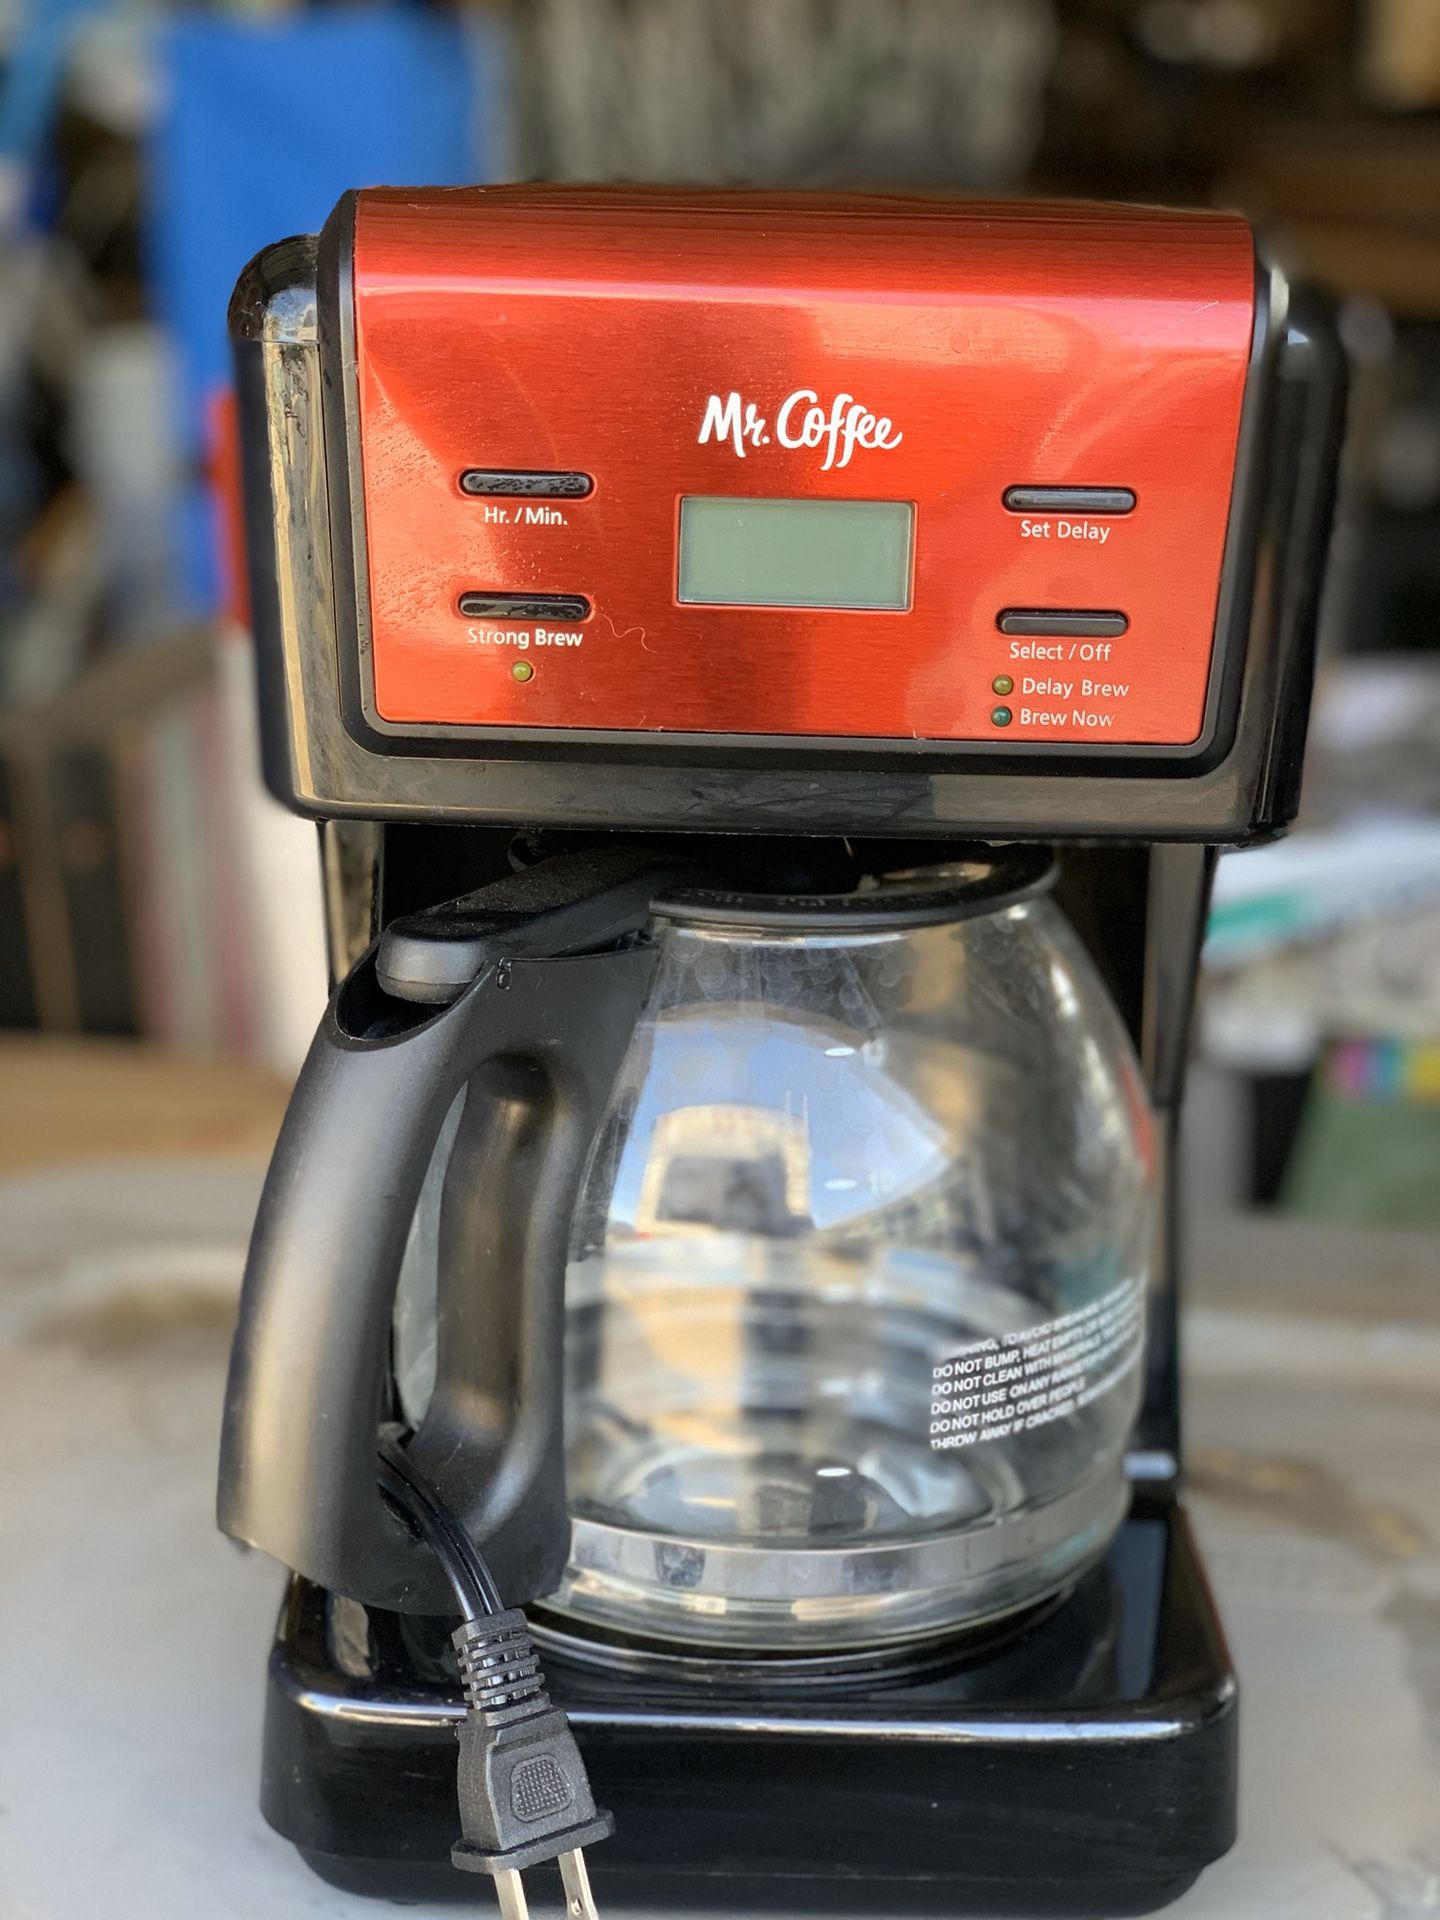 Mr. Coffee 12 cup Programmable Coffee Maker